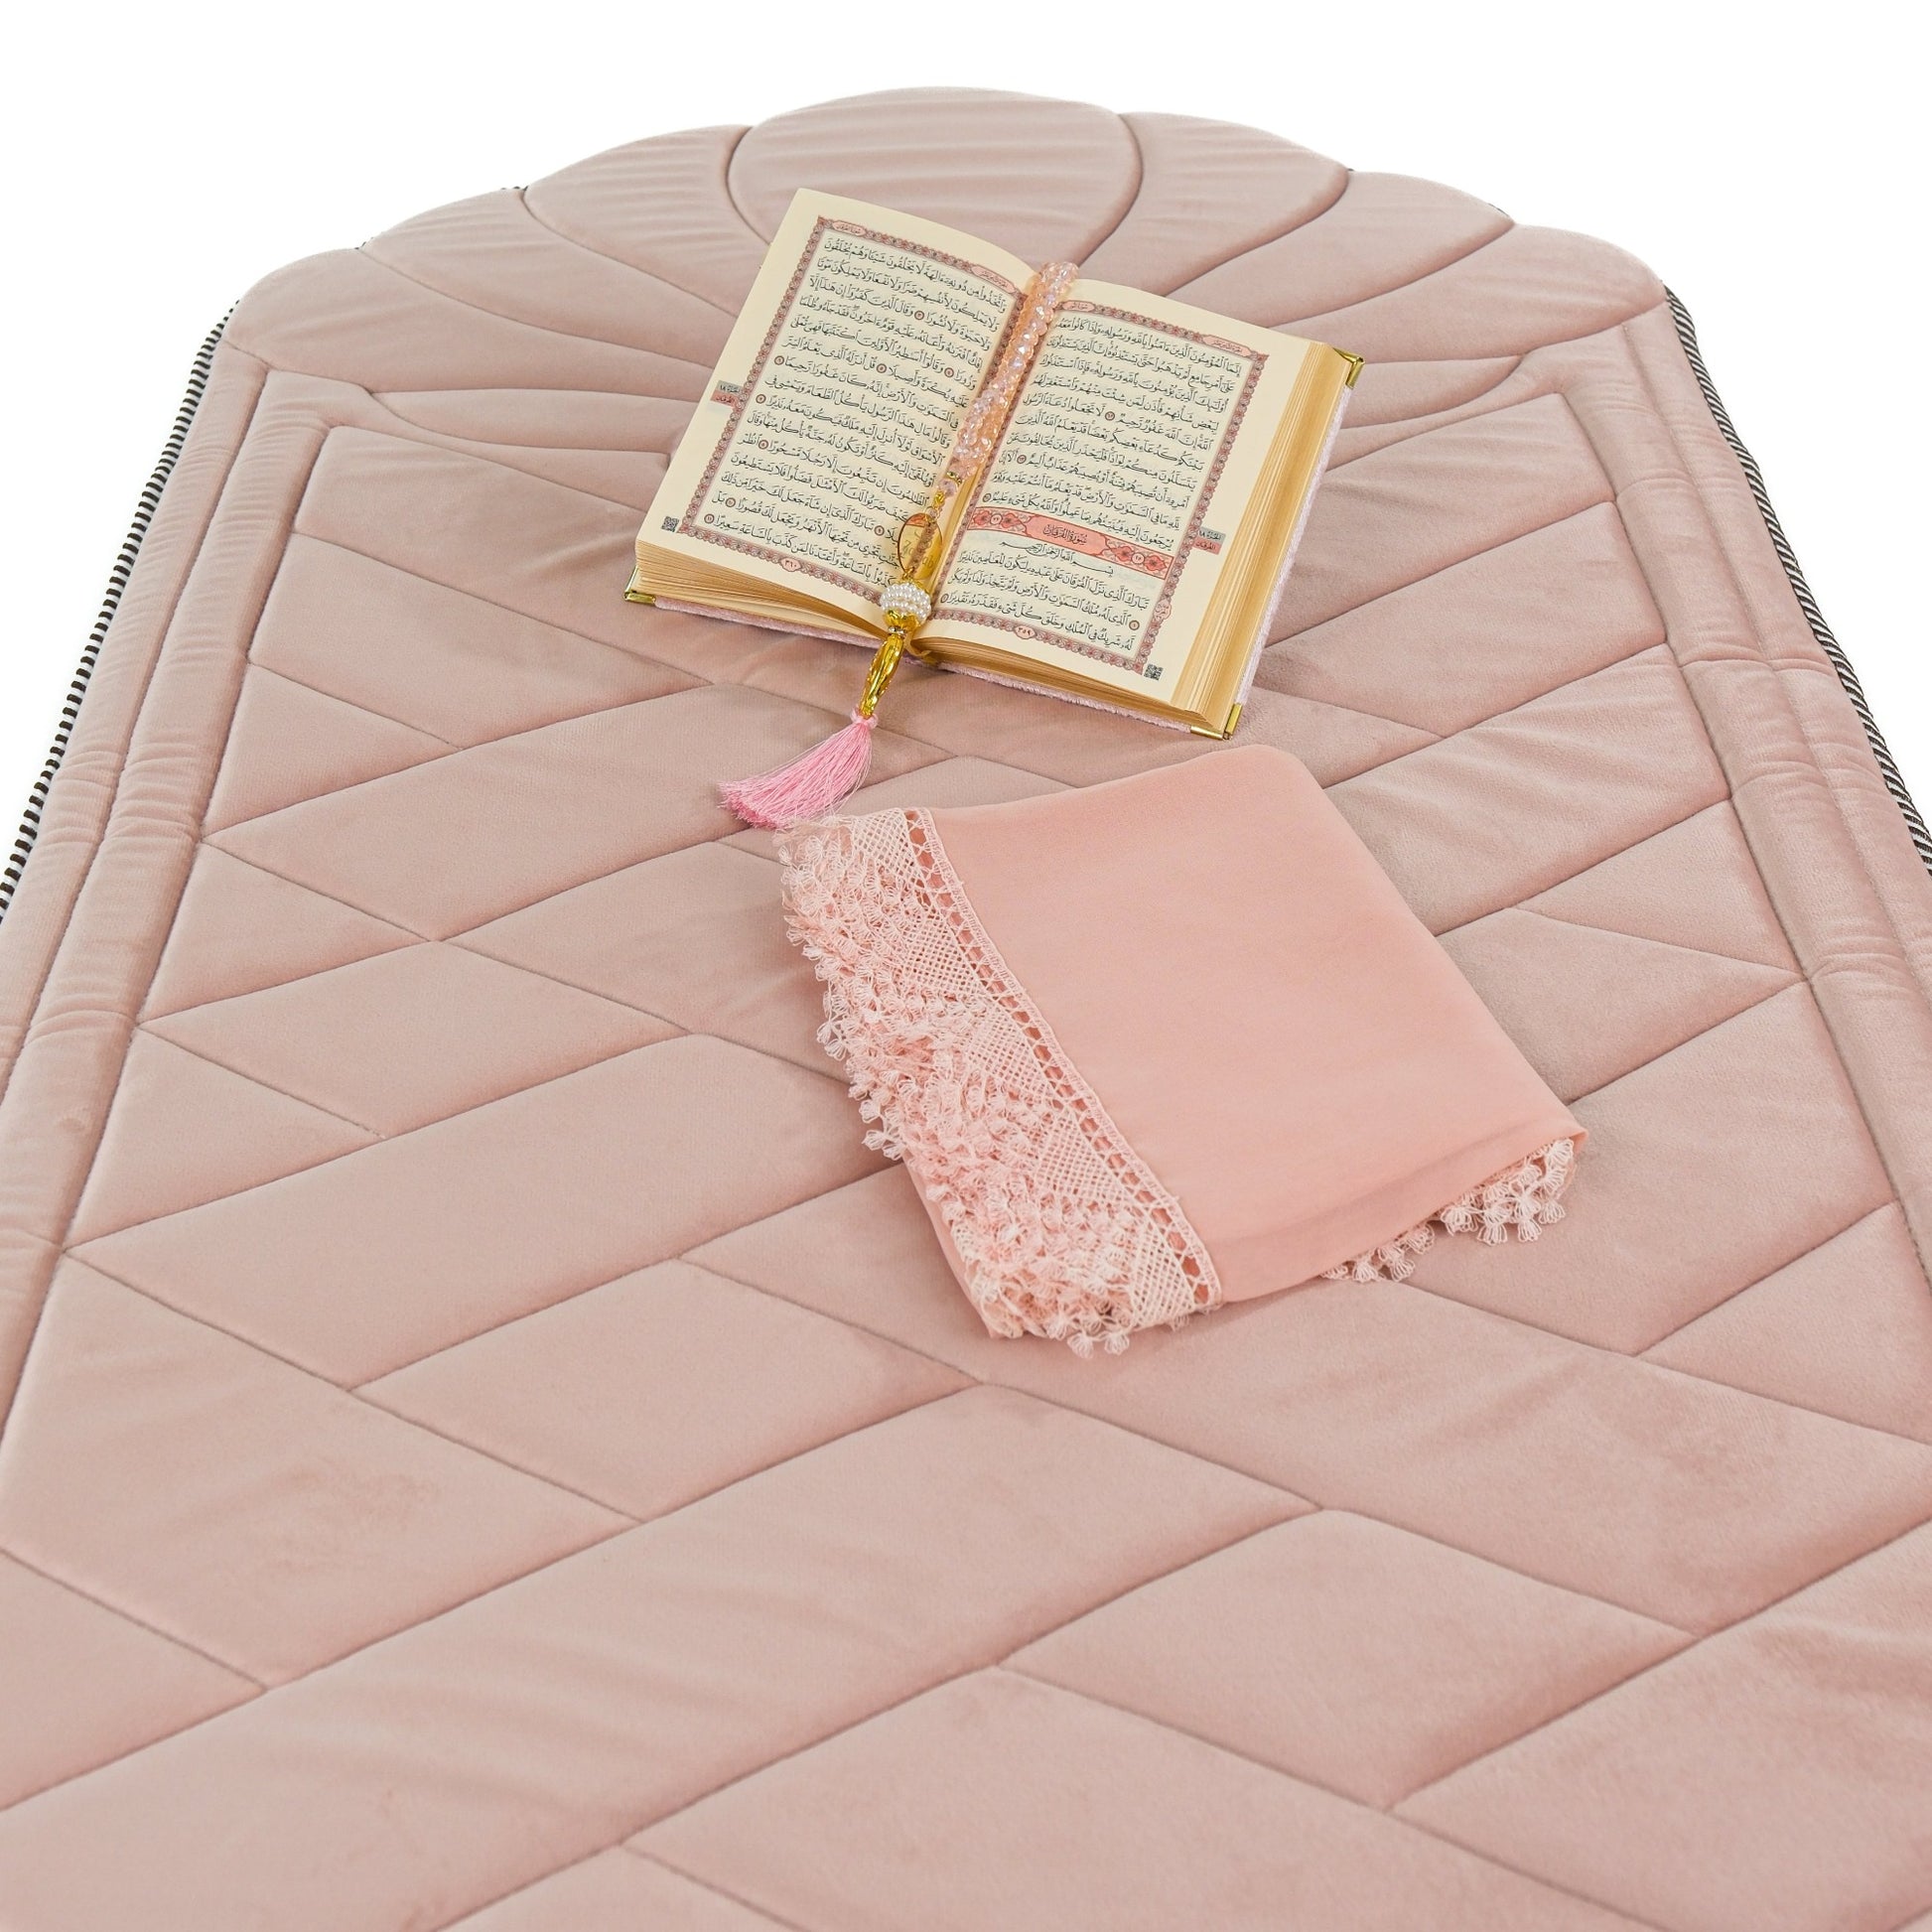 Padded Thick Prayer Mat Quran Tasbeeh Shawl Islamic Muslim Gift Set - Islamic Elite Favors is a handmade gift shop offering a wide variety of unique and personalized gifts for all occasions. Whether you're looking for the perfect Ramadan, Eid, Hajj, wedding gift or something special for a birthday, baby shower or anniversary, we have something for everyone. High quality, made with love.